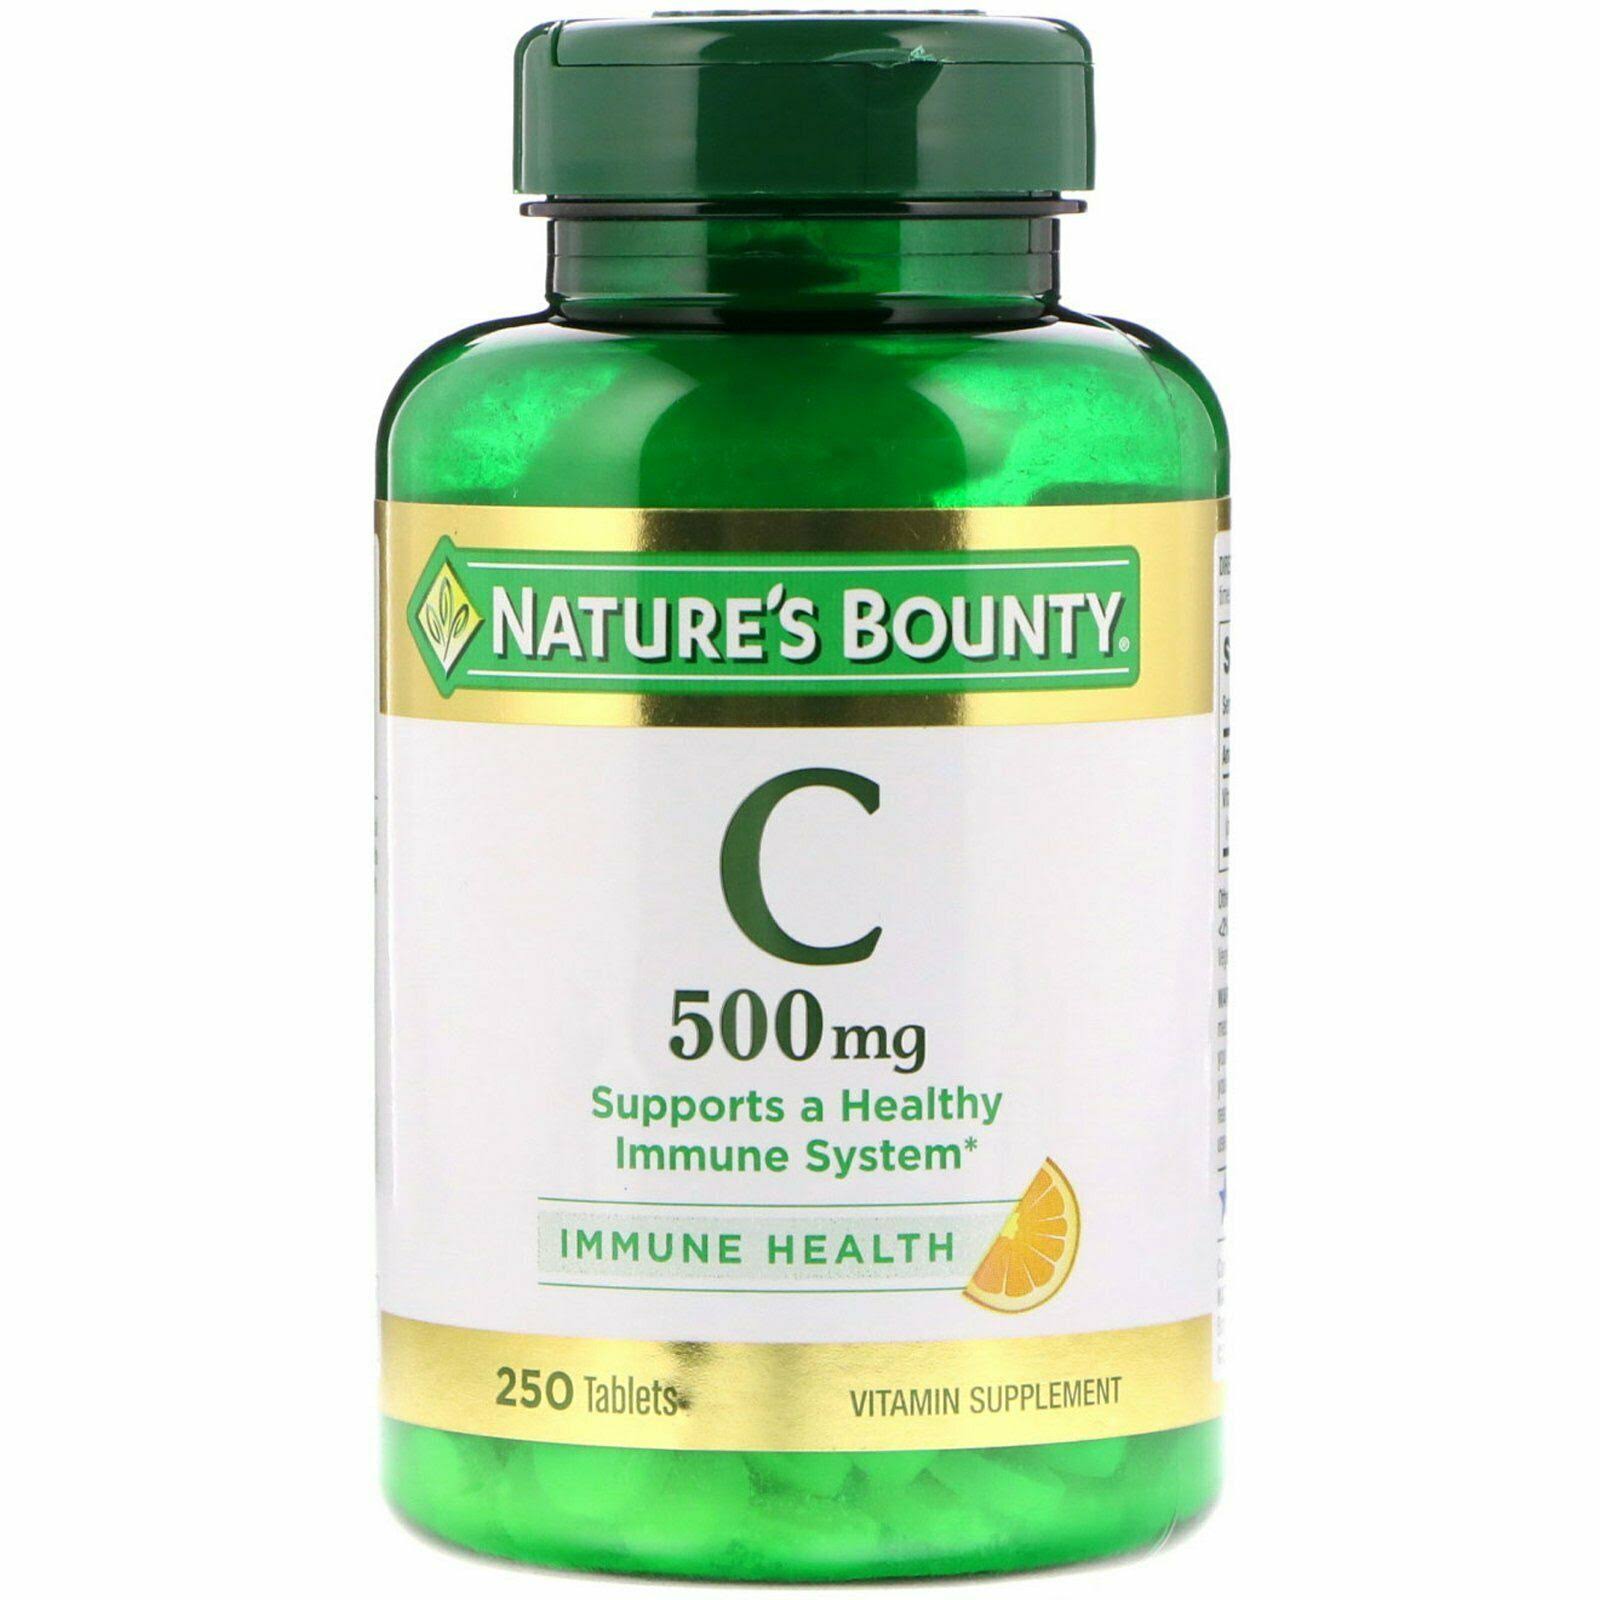 Nature's Bounty Vitamin-C 500mg Dietary Supplement - 250 Tablets